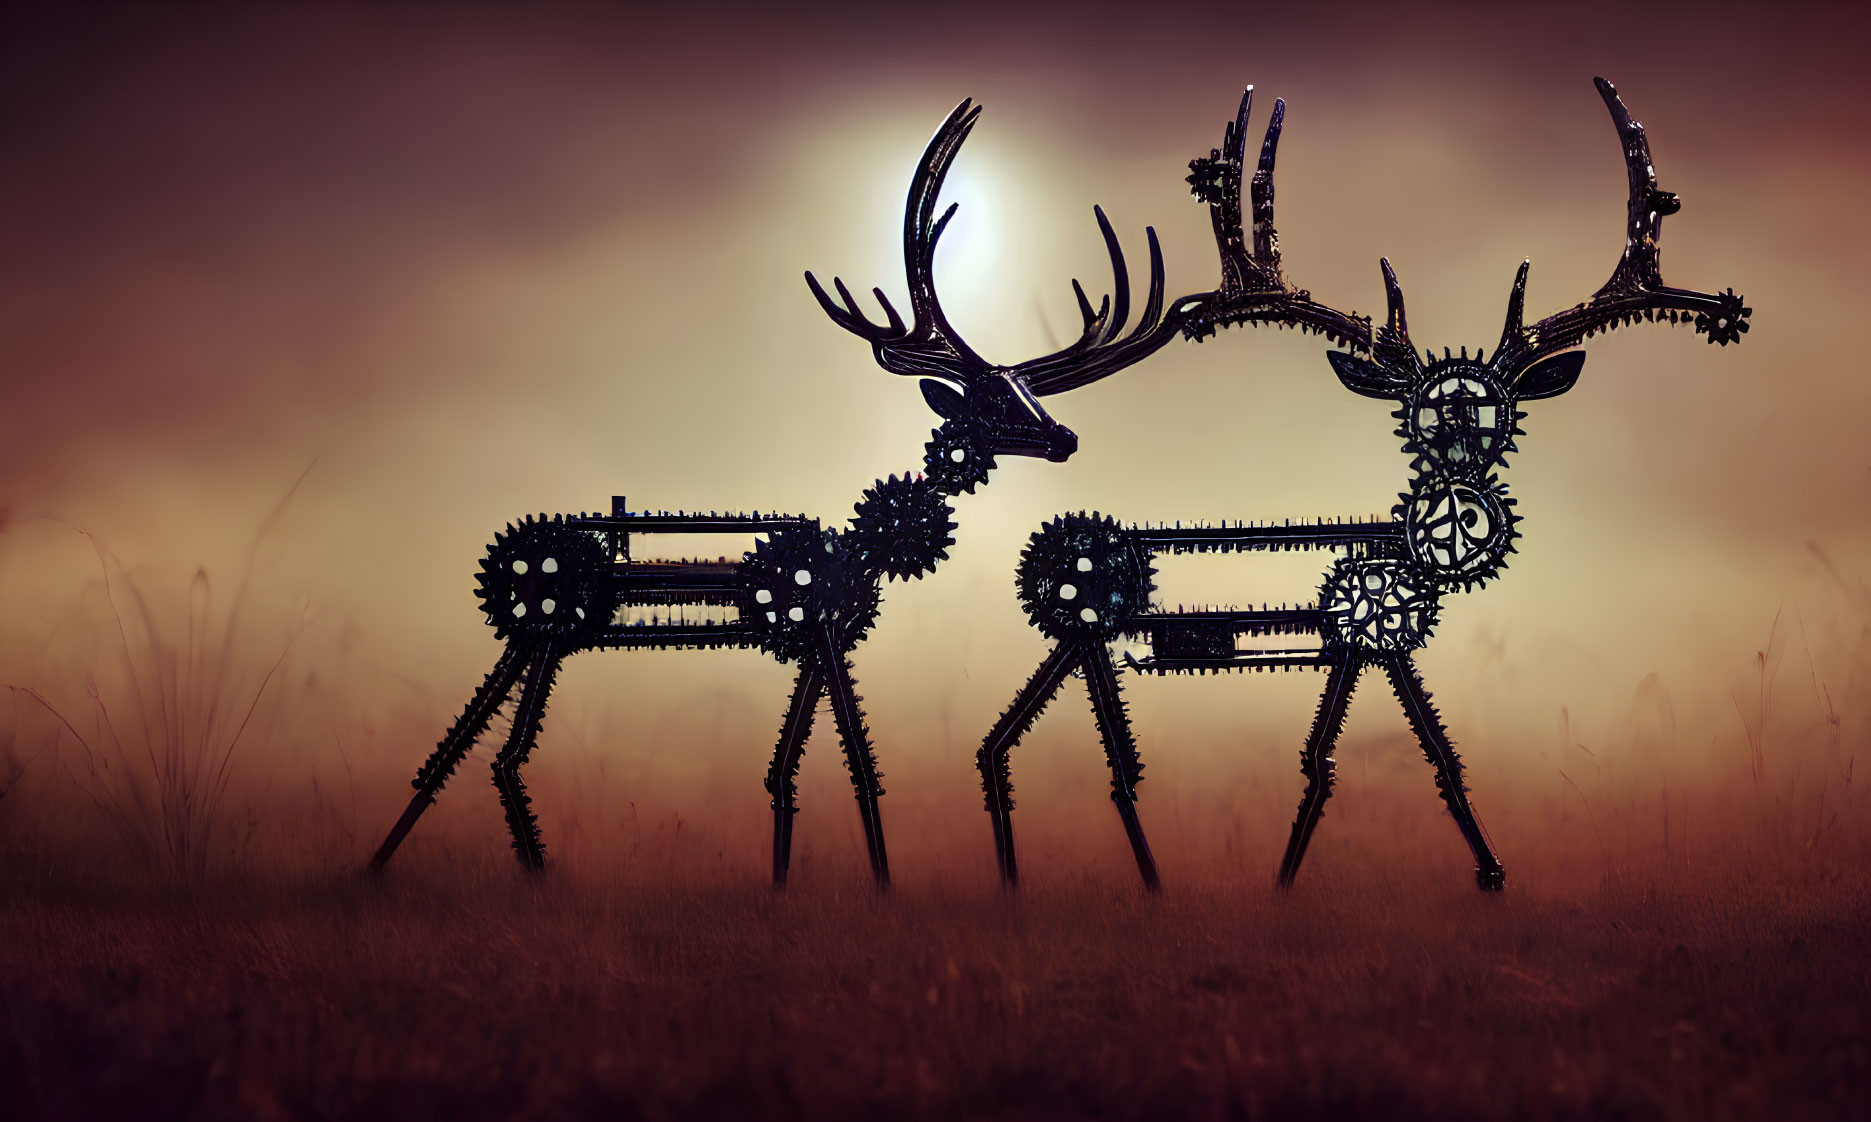 Mechanical deer silhouettes against evening sky with crescent moon